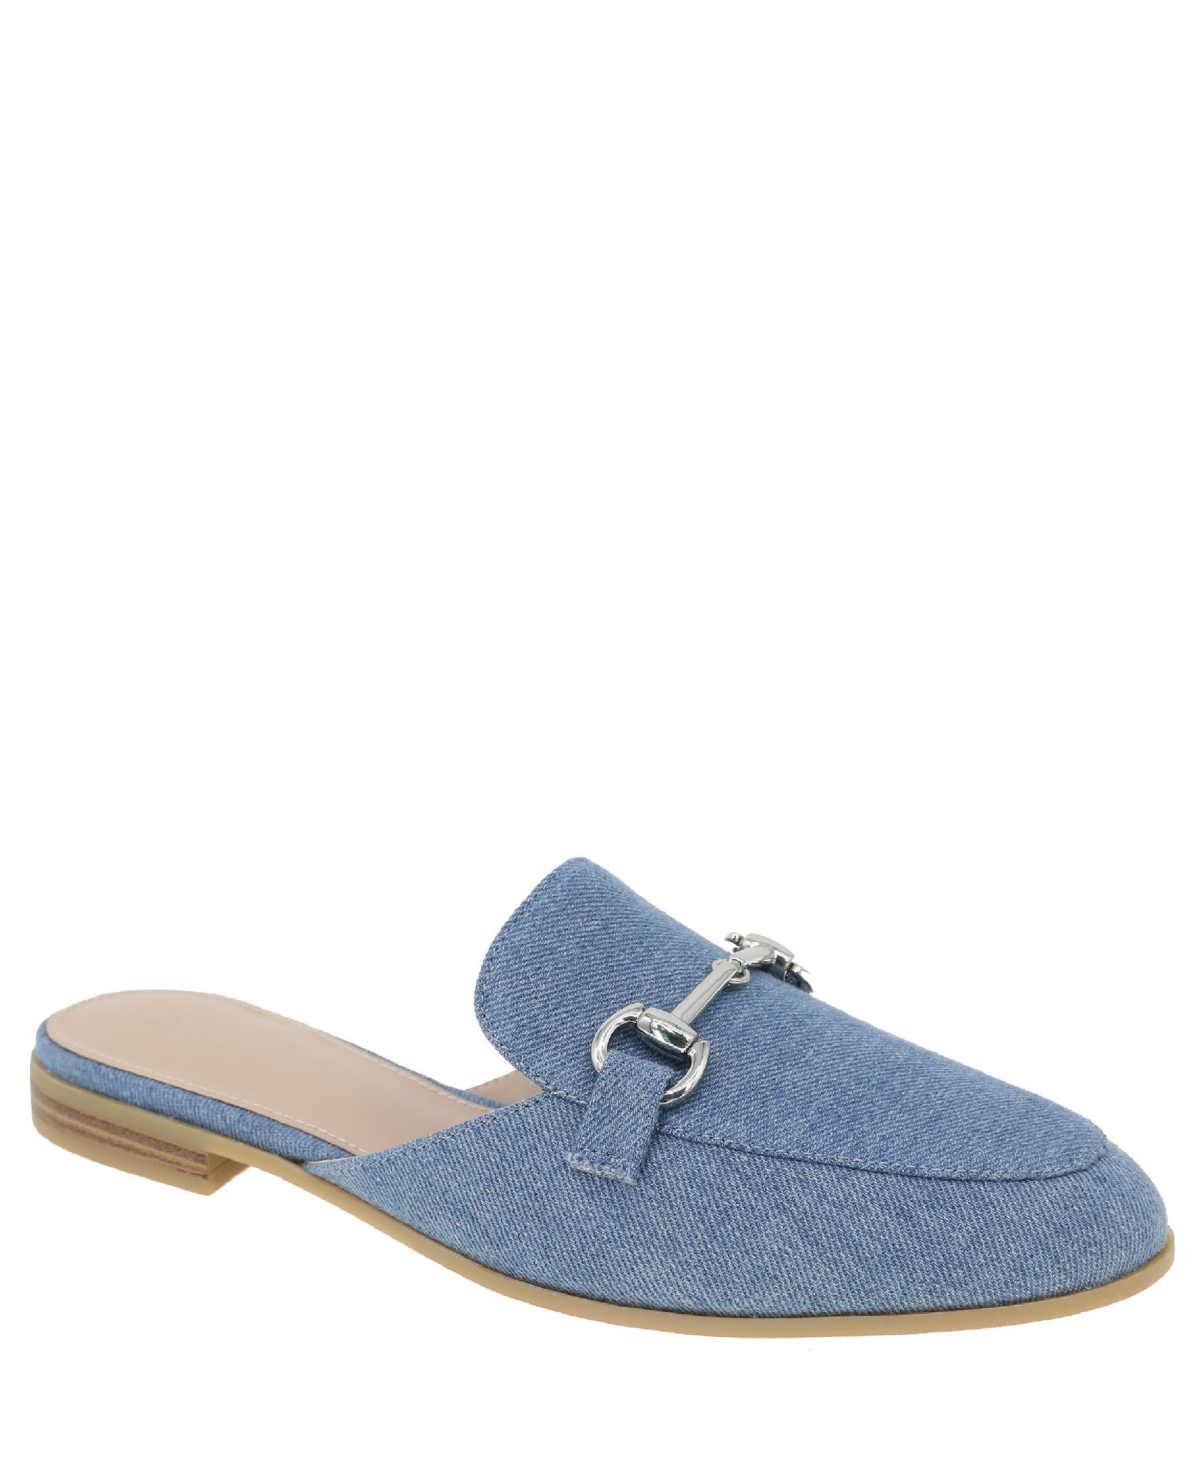 Women's Zorie Tailored Slip-On Loafer Mules - Peony